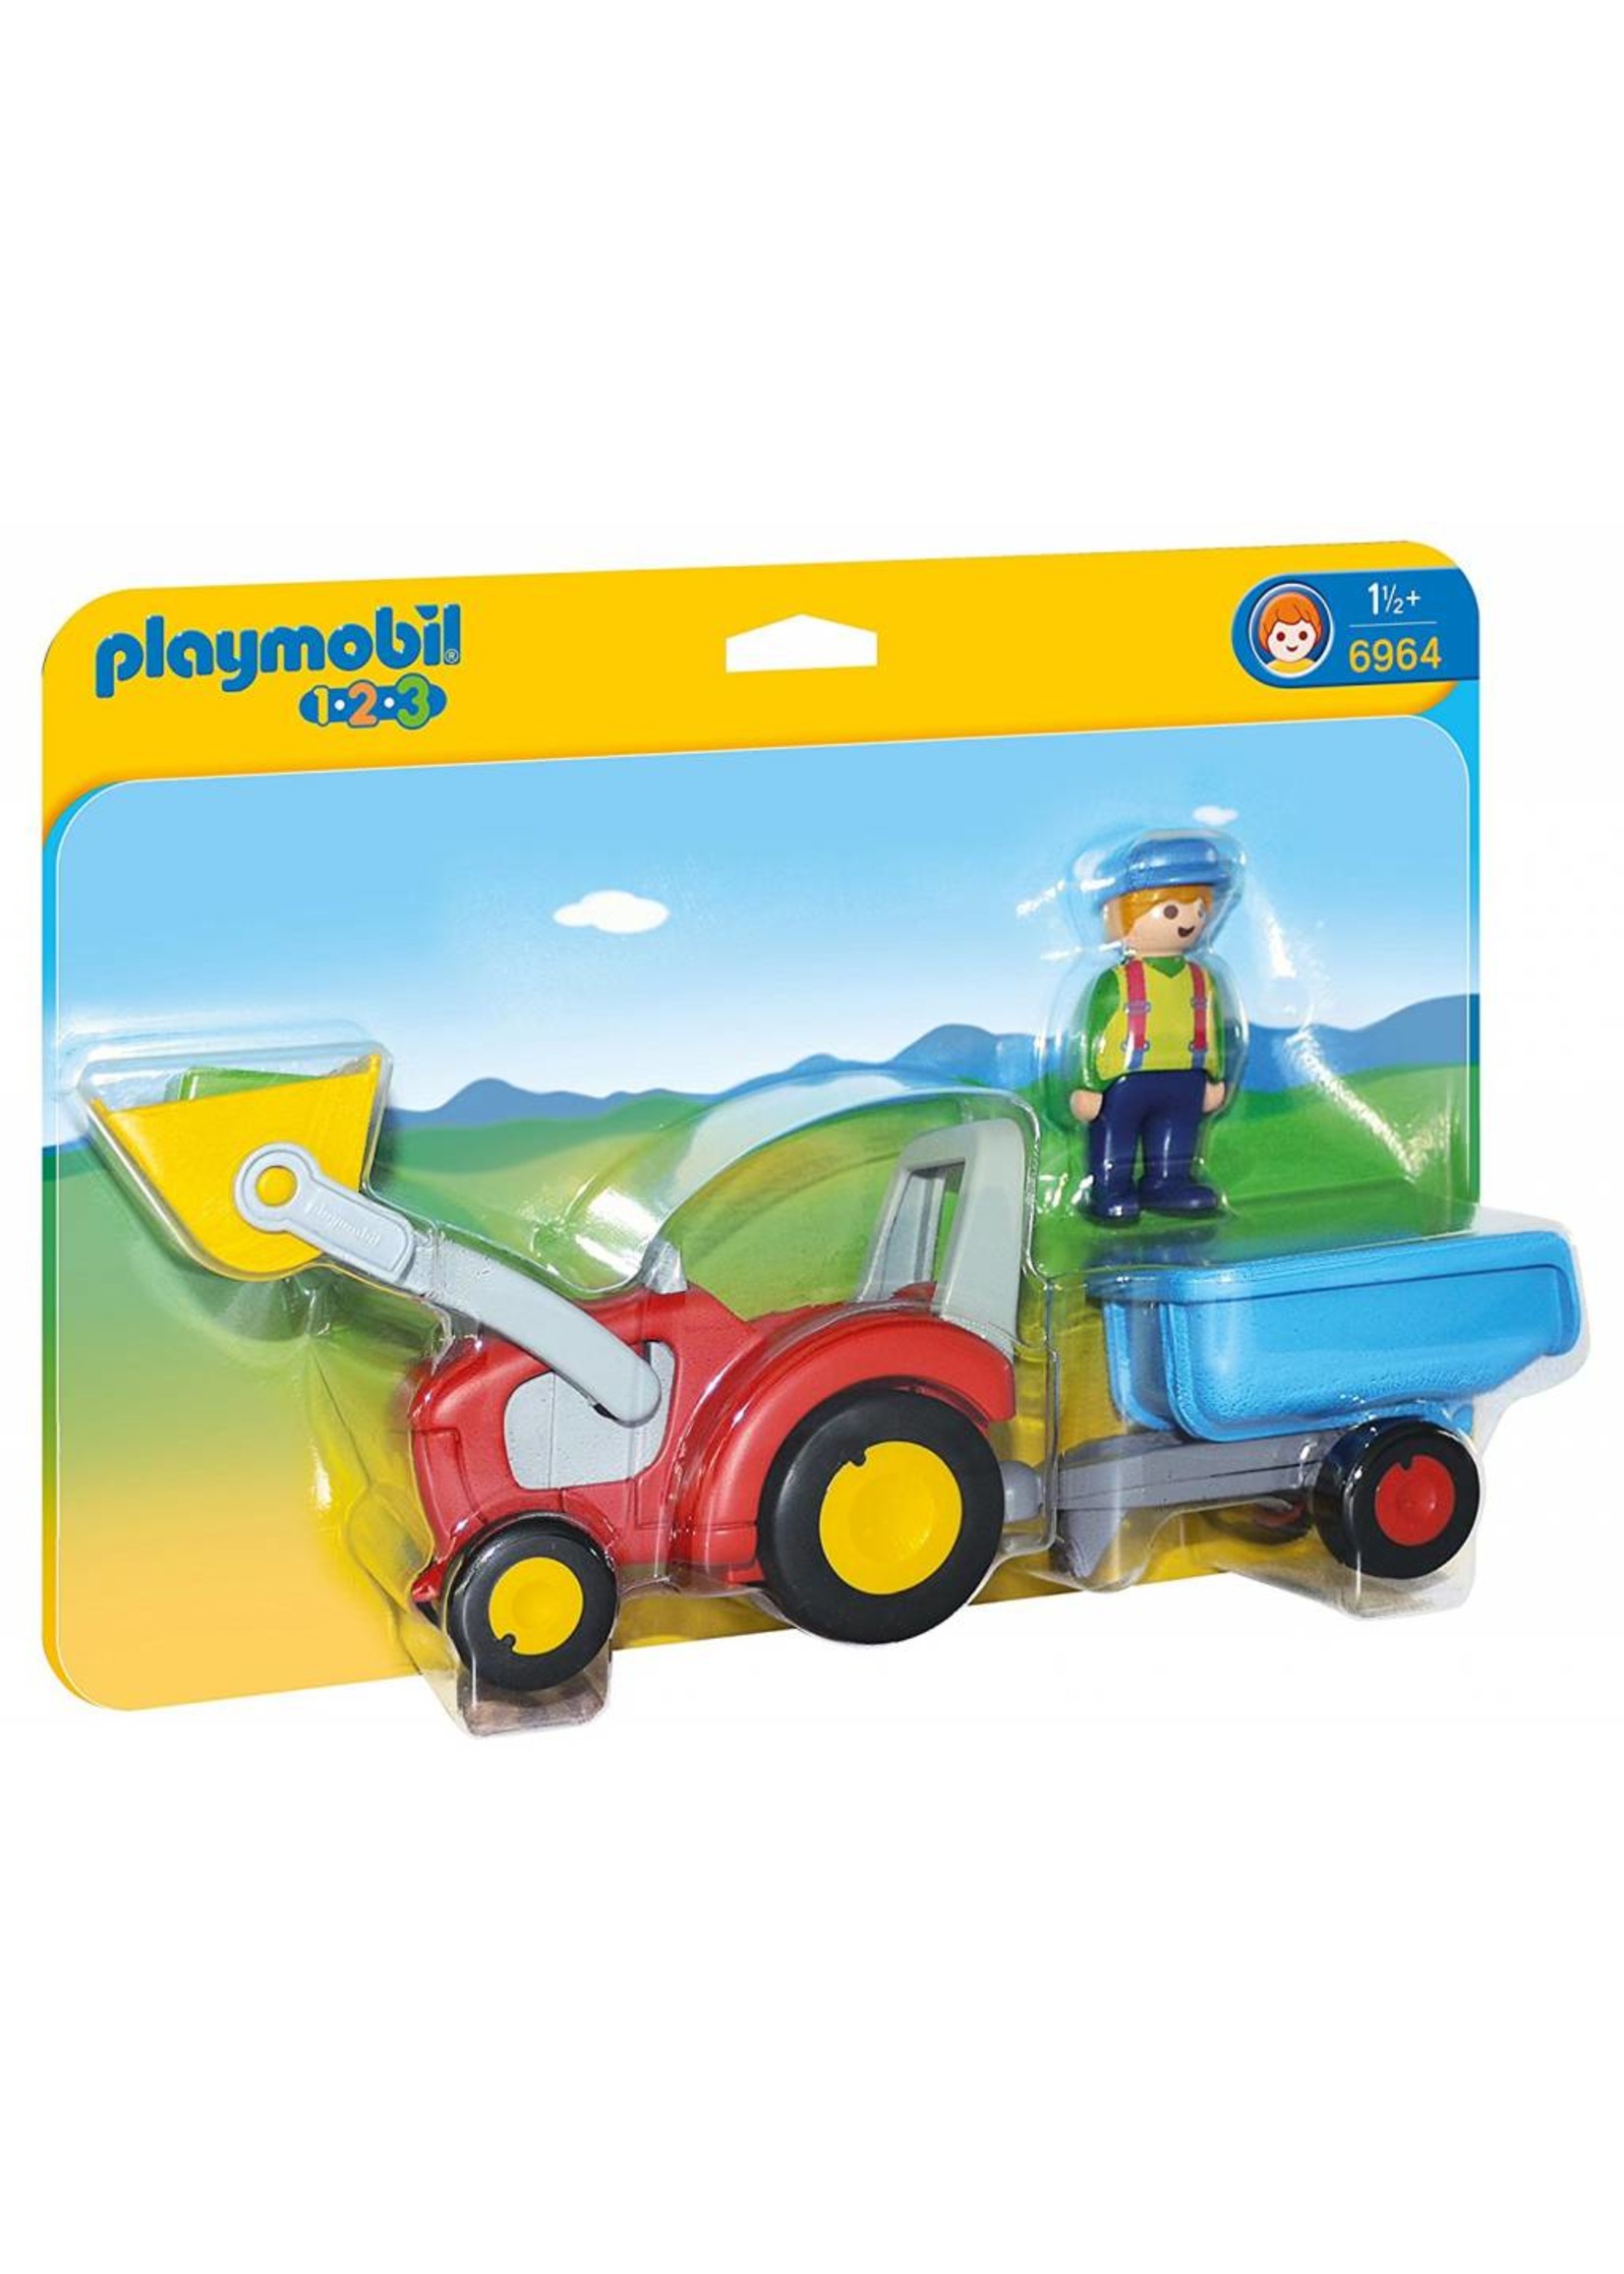 Playmobil 1.2.3 Tractor with Trailer